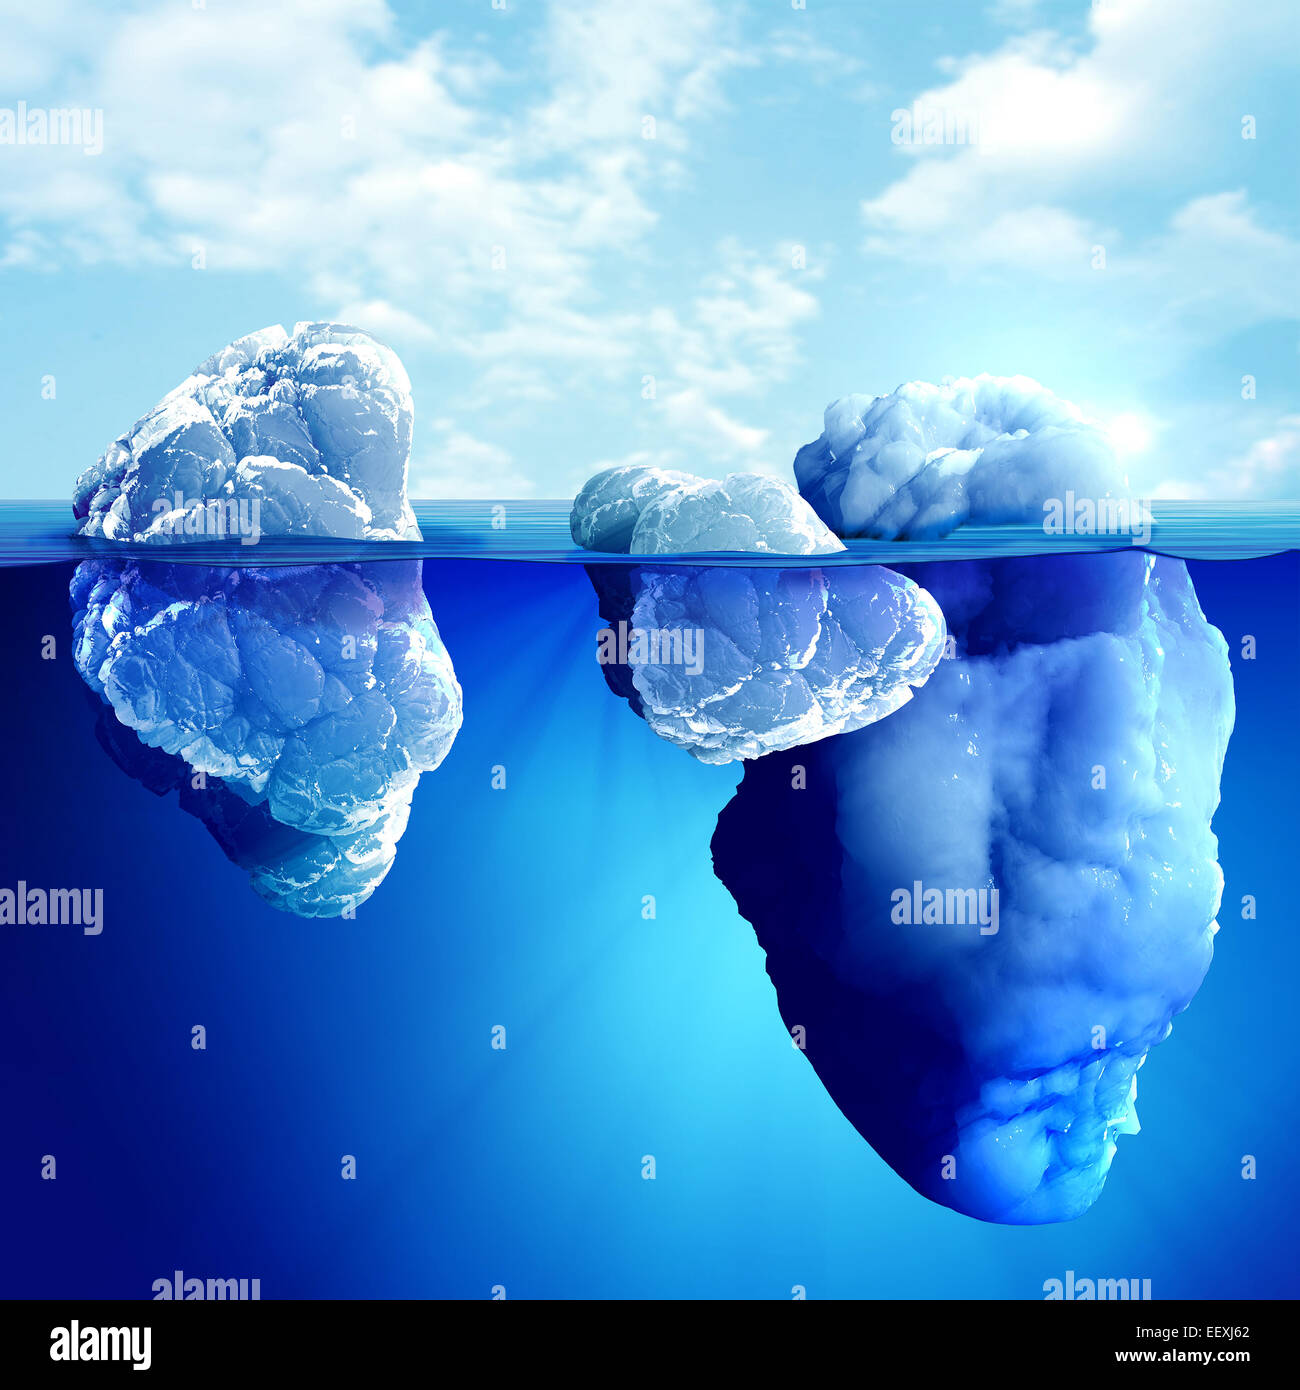 Underwater view of iceberg with beautiful transparent sea on background Stock Photo